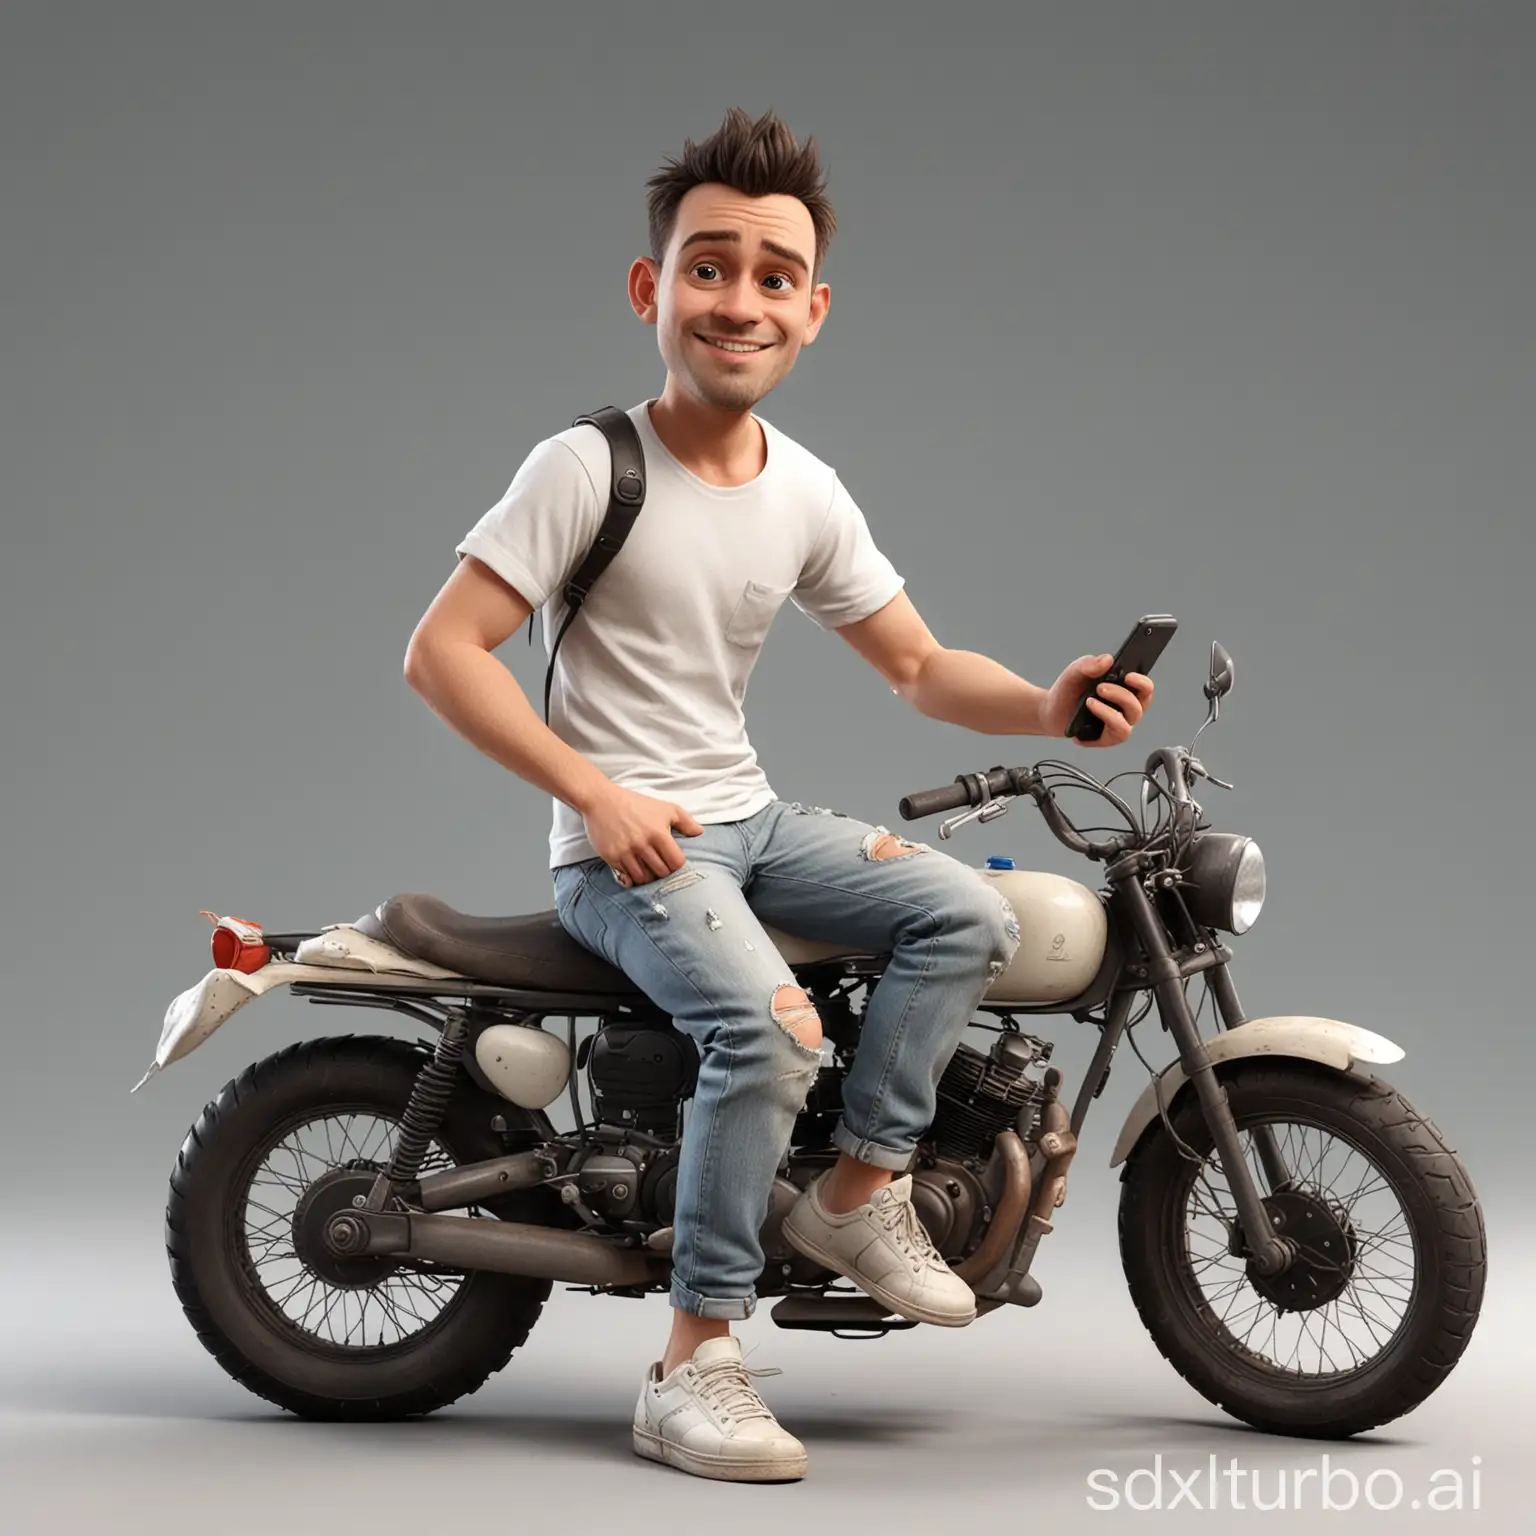 Man-on-Motorbike-Playing-Cellphone-with-Workshop-Background